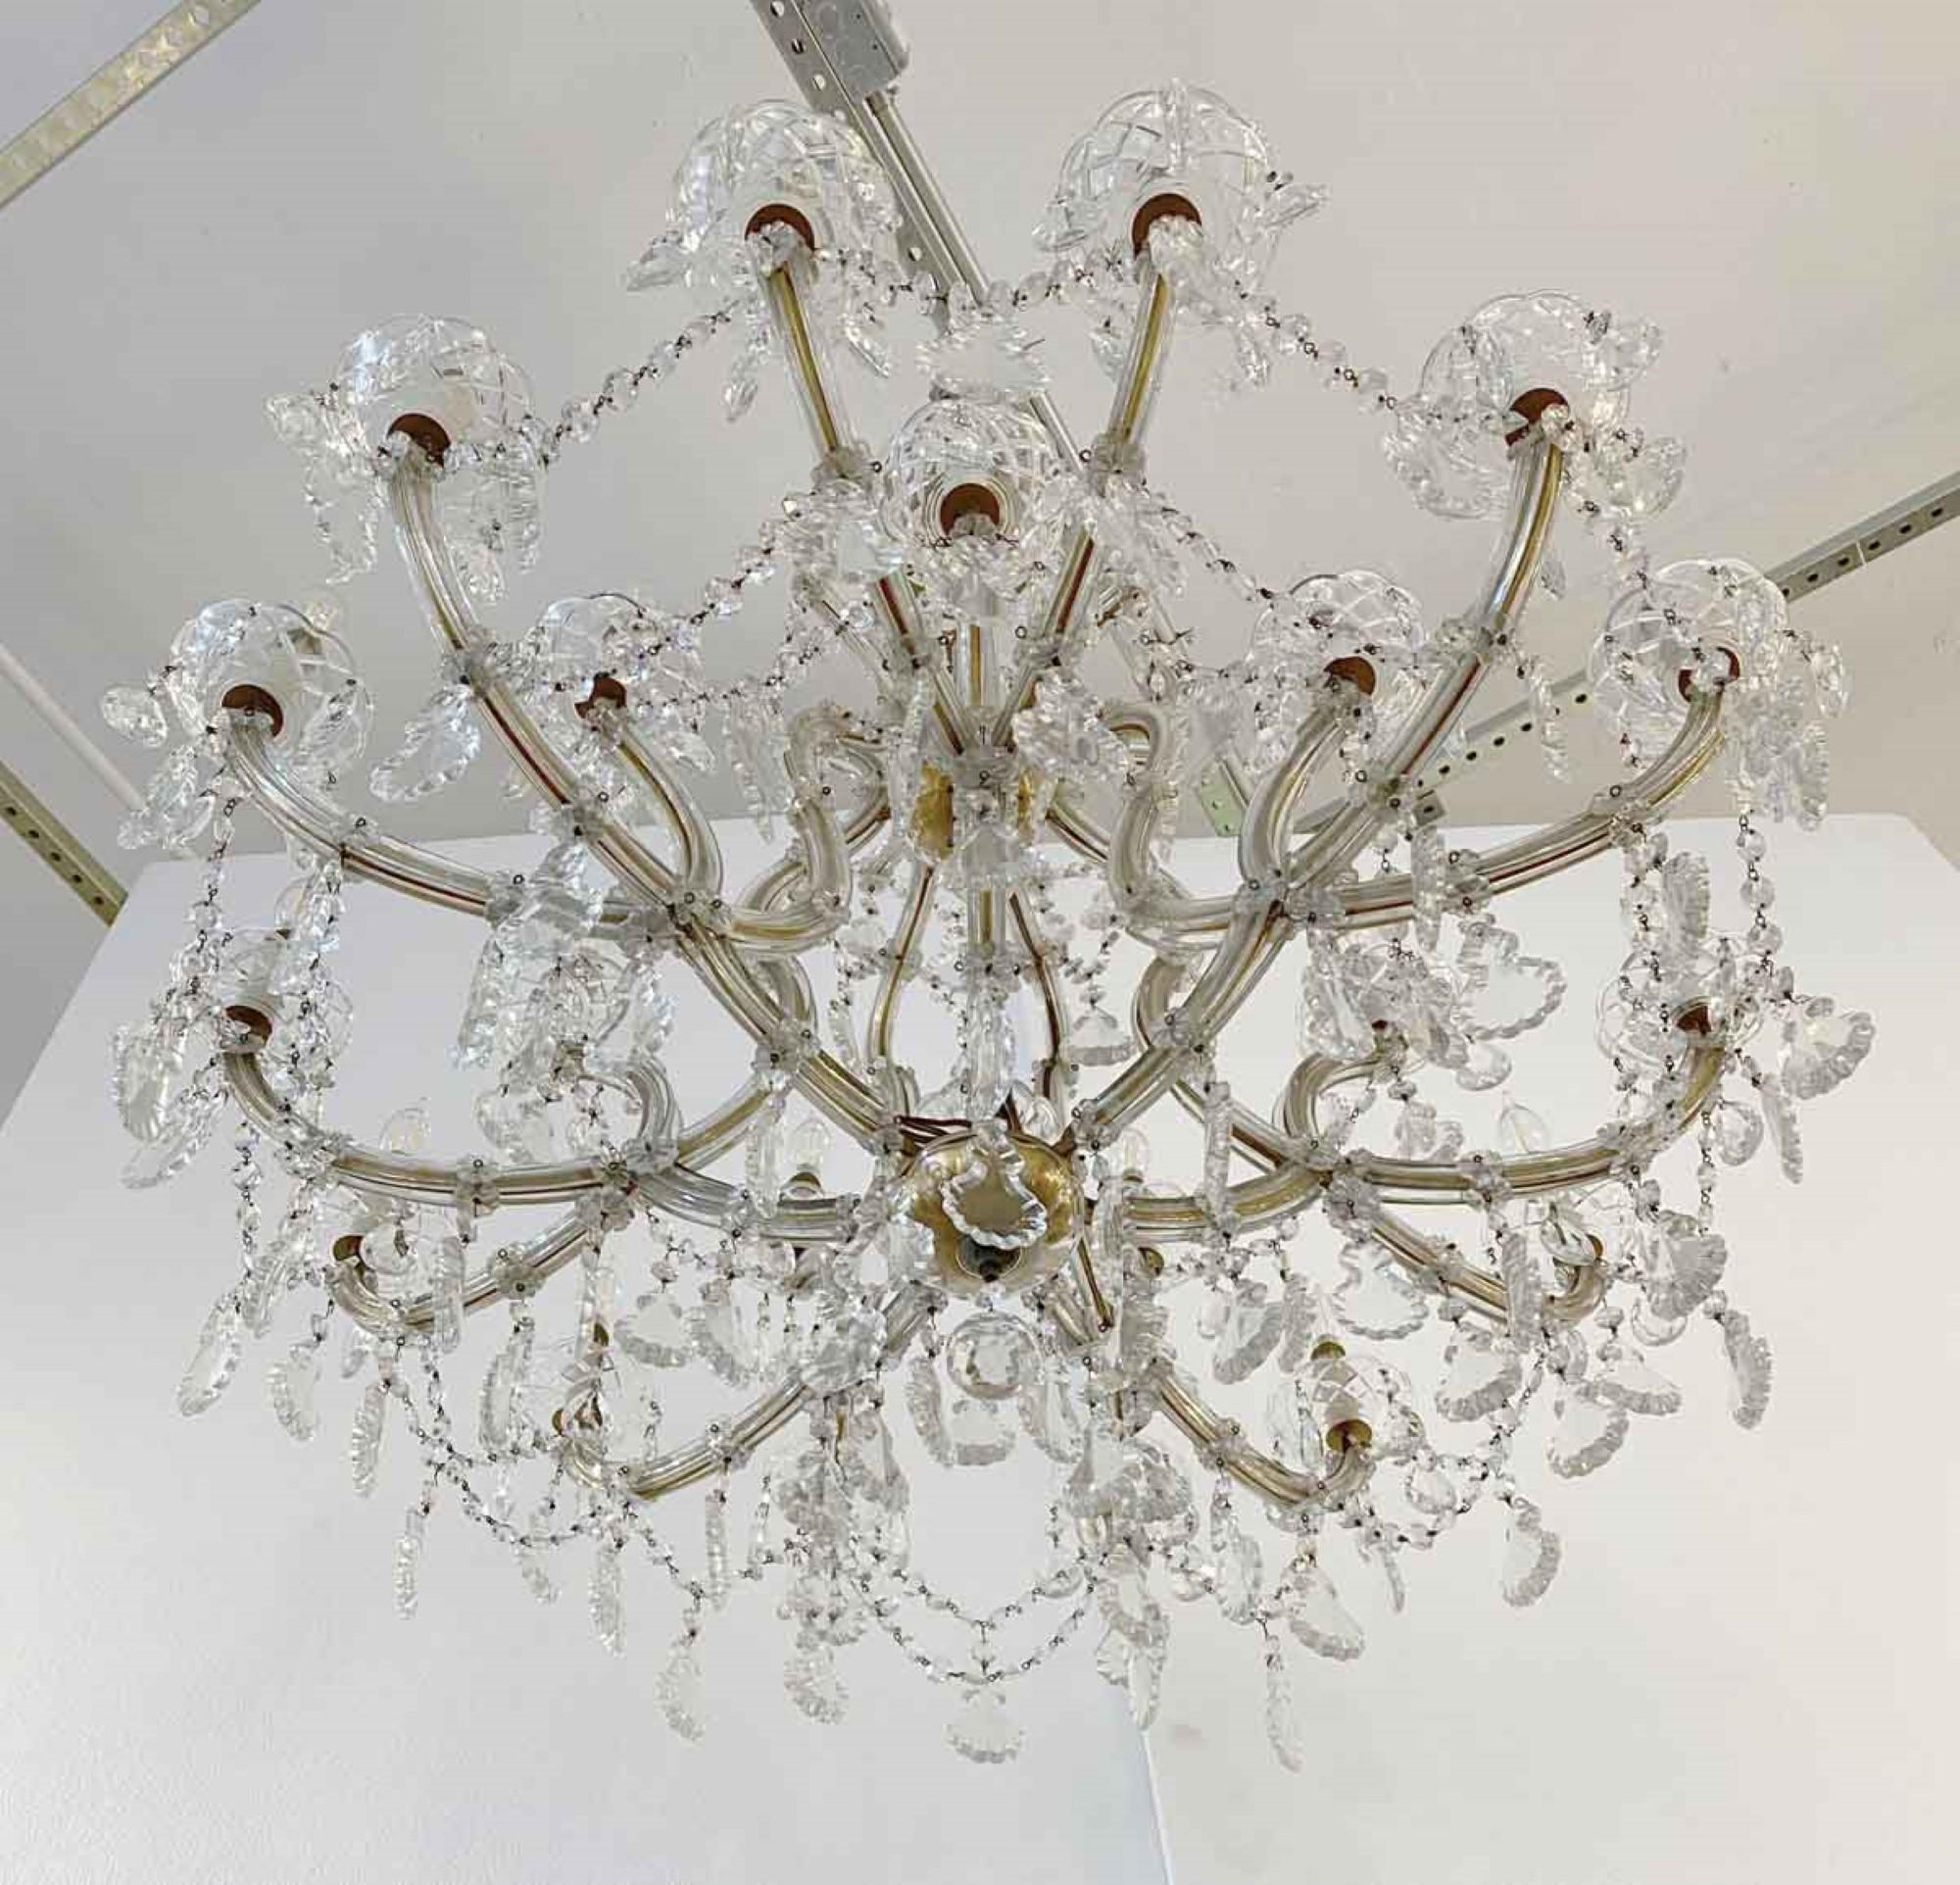 Baroque 1950s Marie Therese Crystal Chandelier 21 Arms Substantial Size Antique